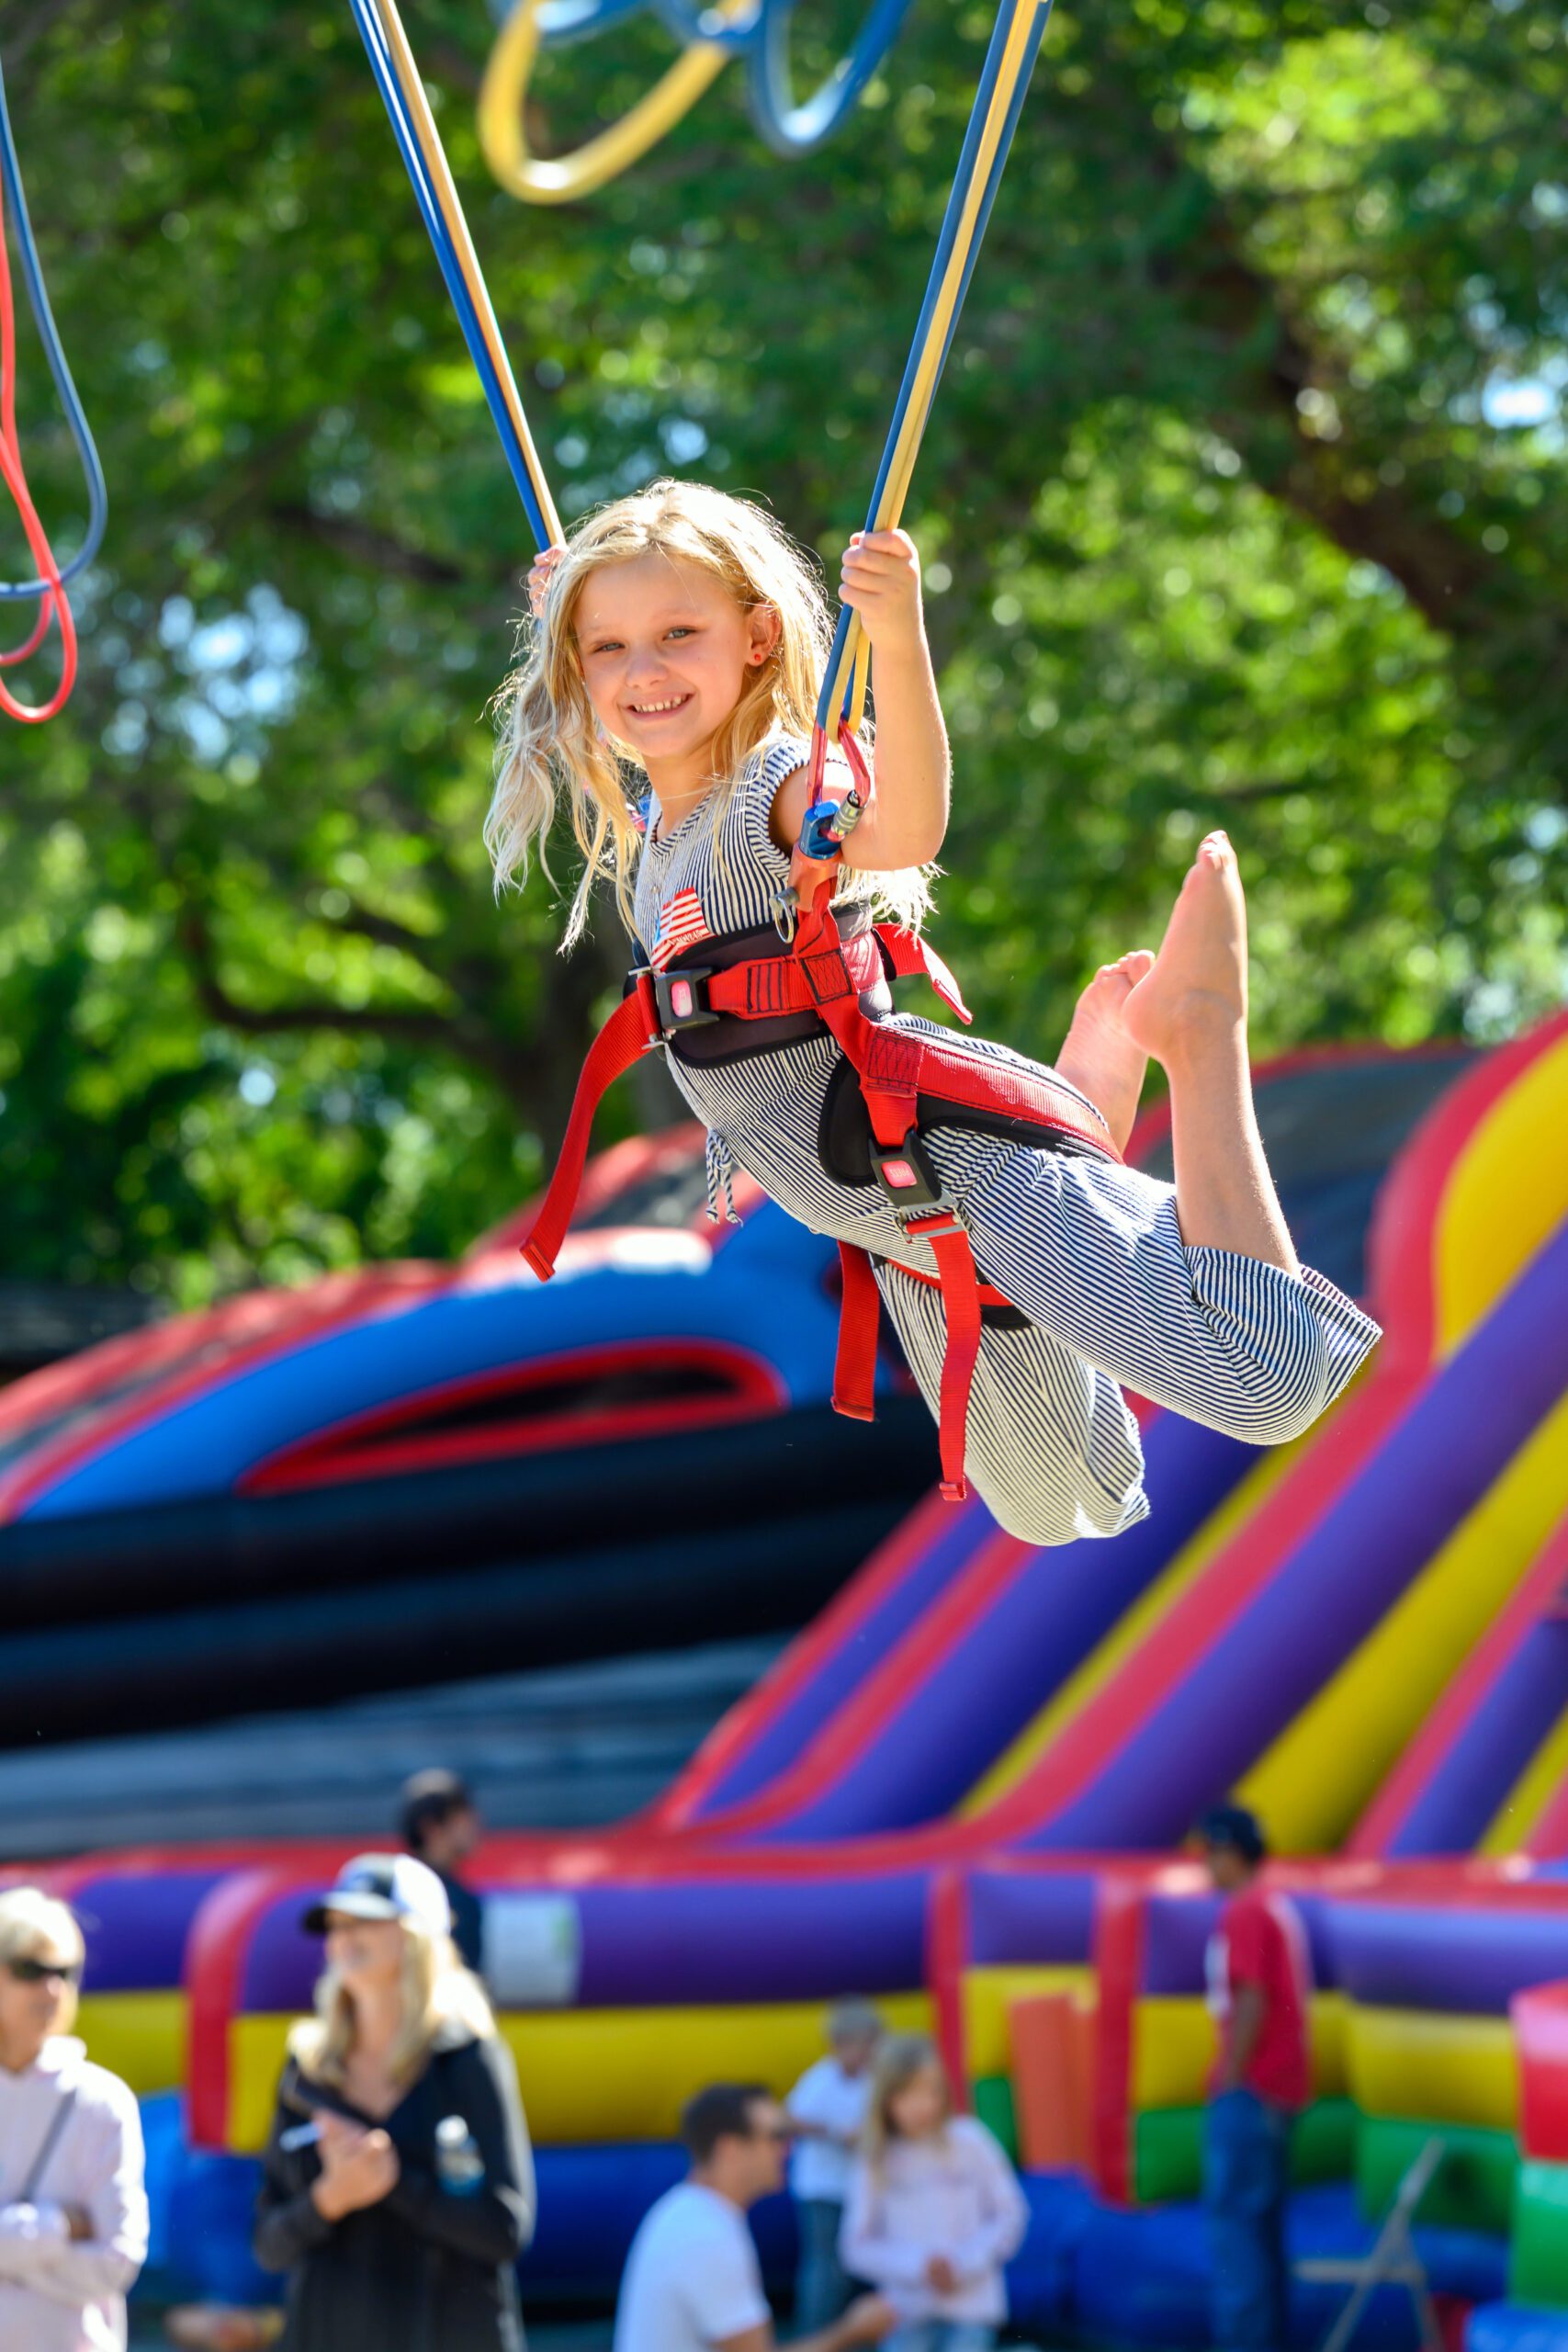 Child bouncing on trampoline while wearing a harness